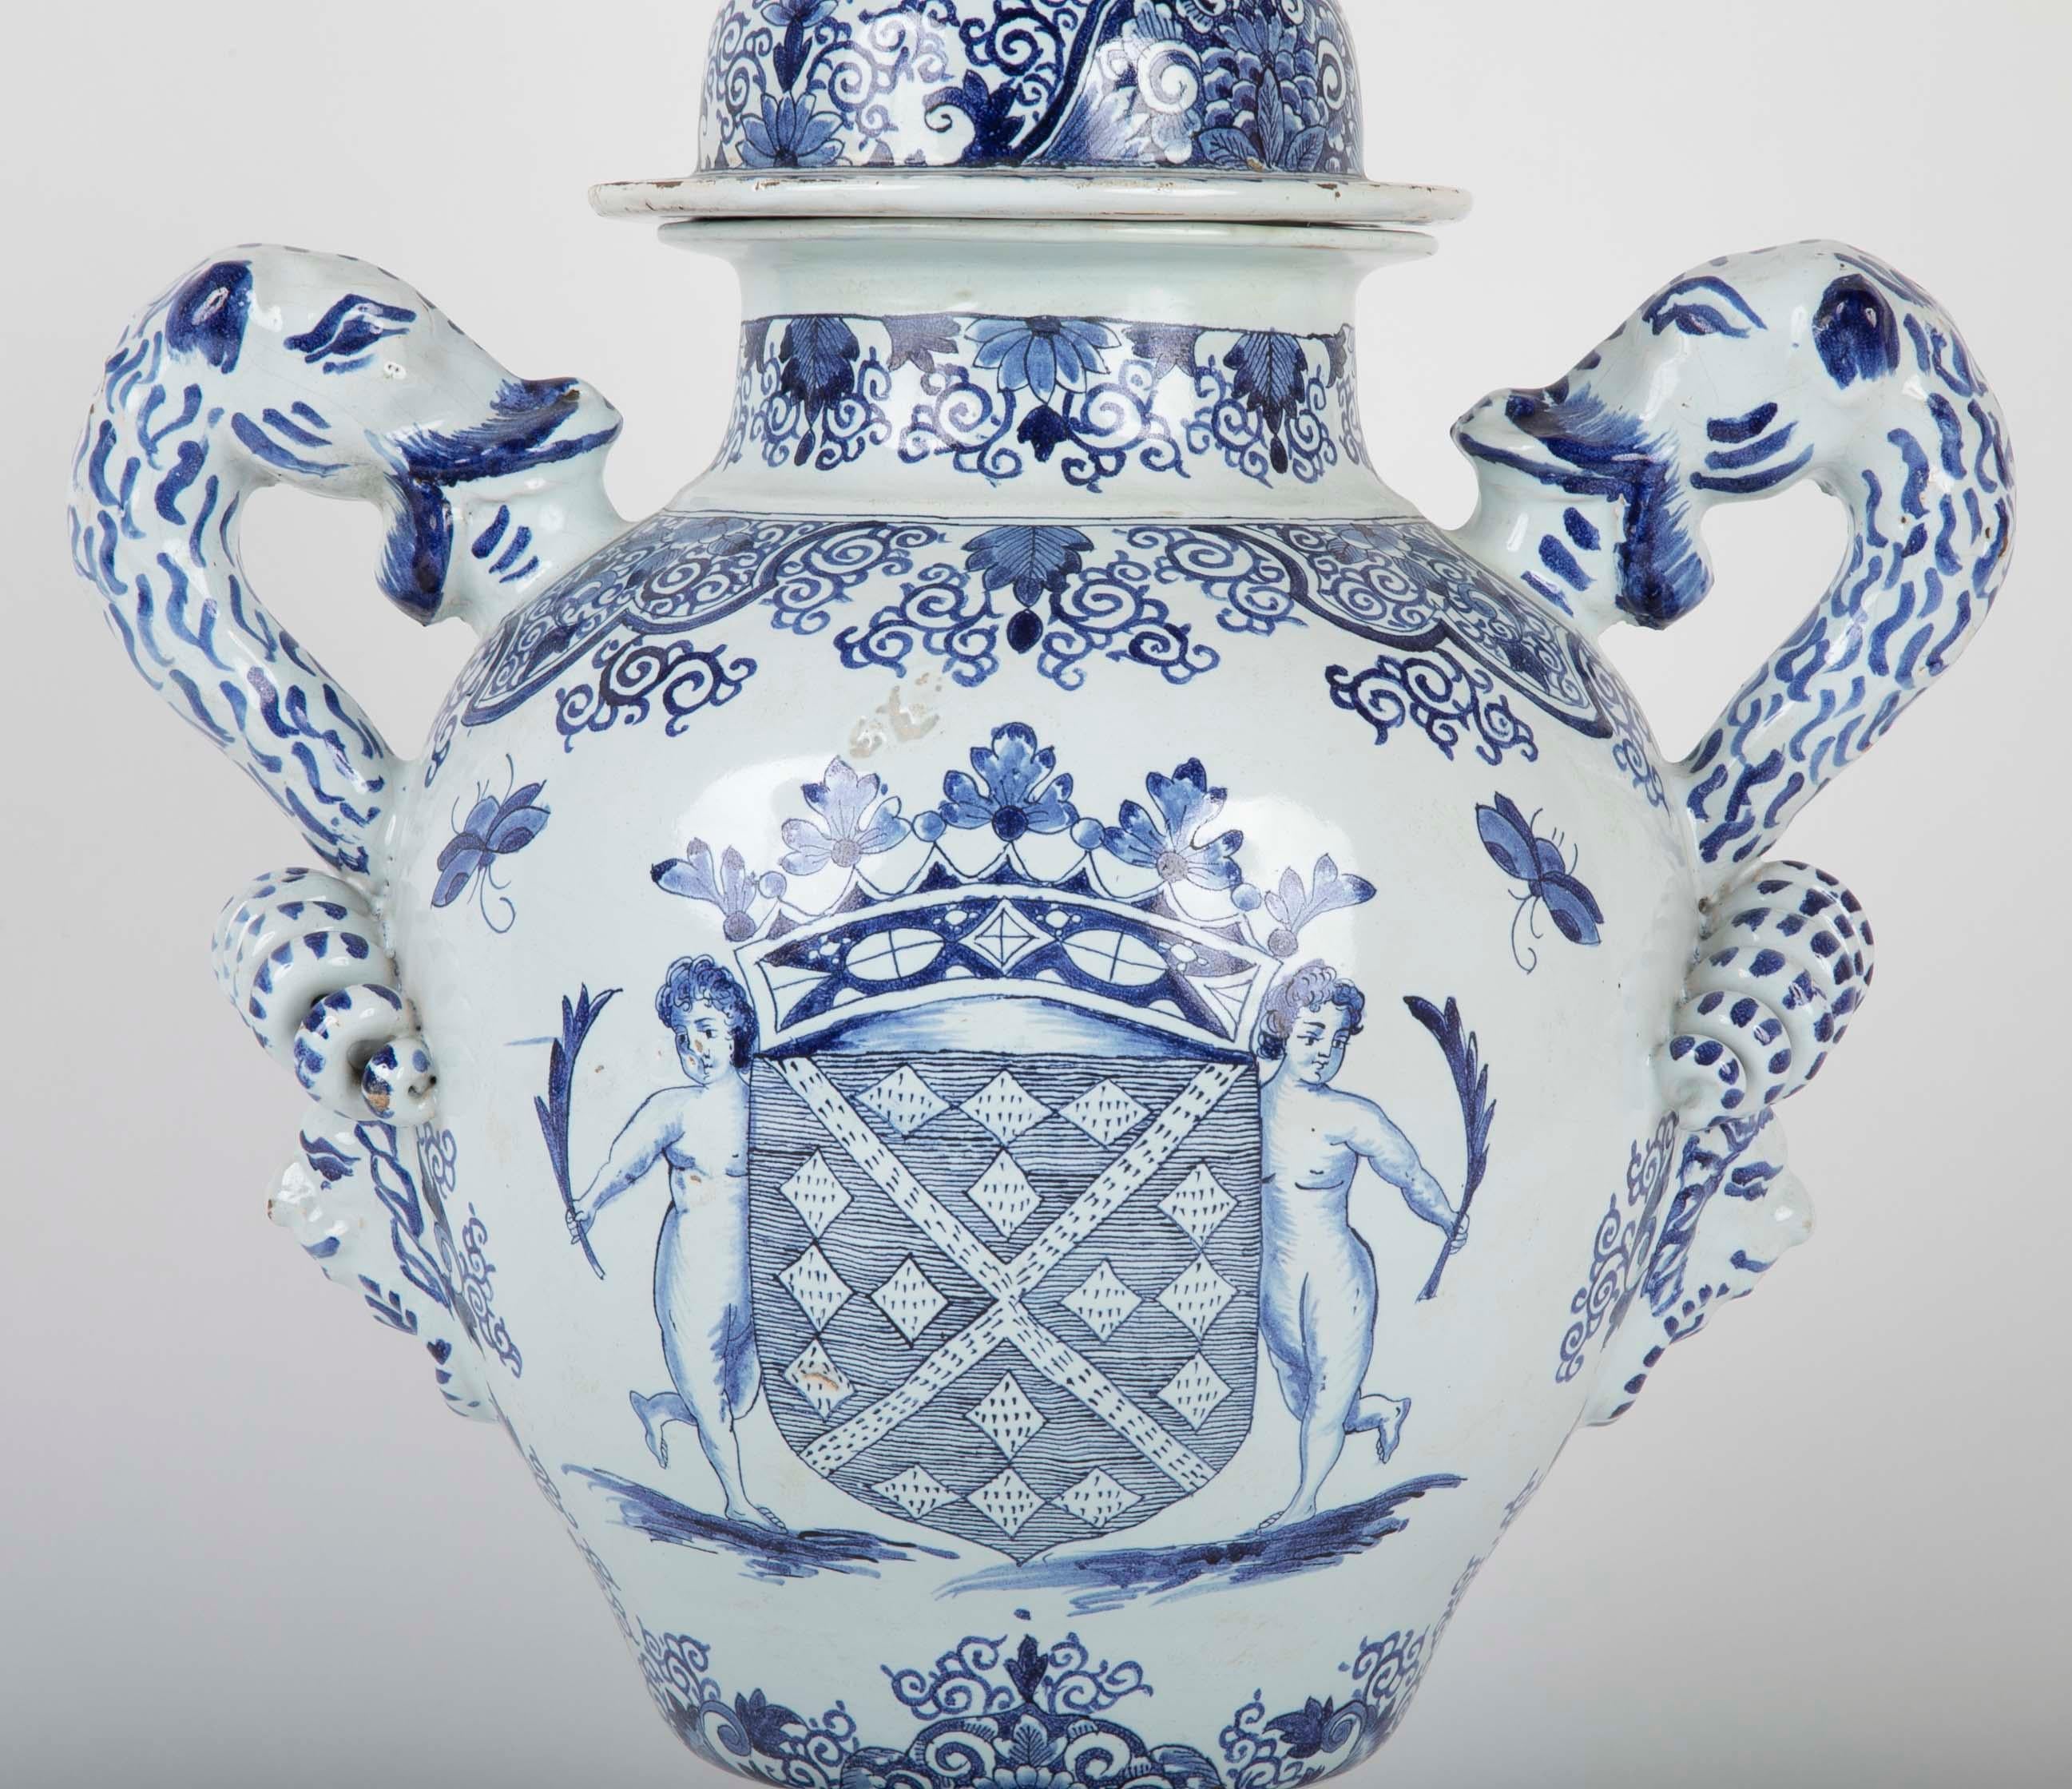 An early 19th century French faience lidded jar; probably Rouen. Painted with a heraldic crest. Delft style.